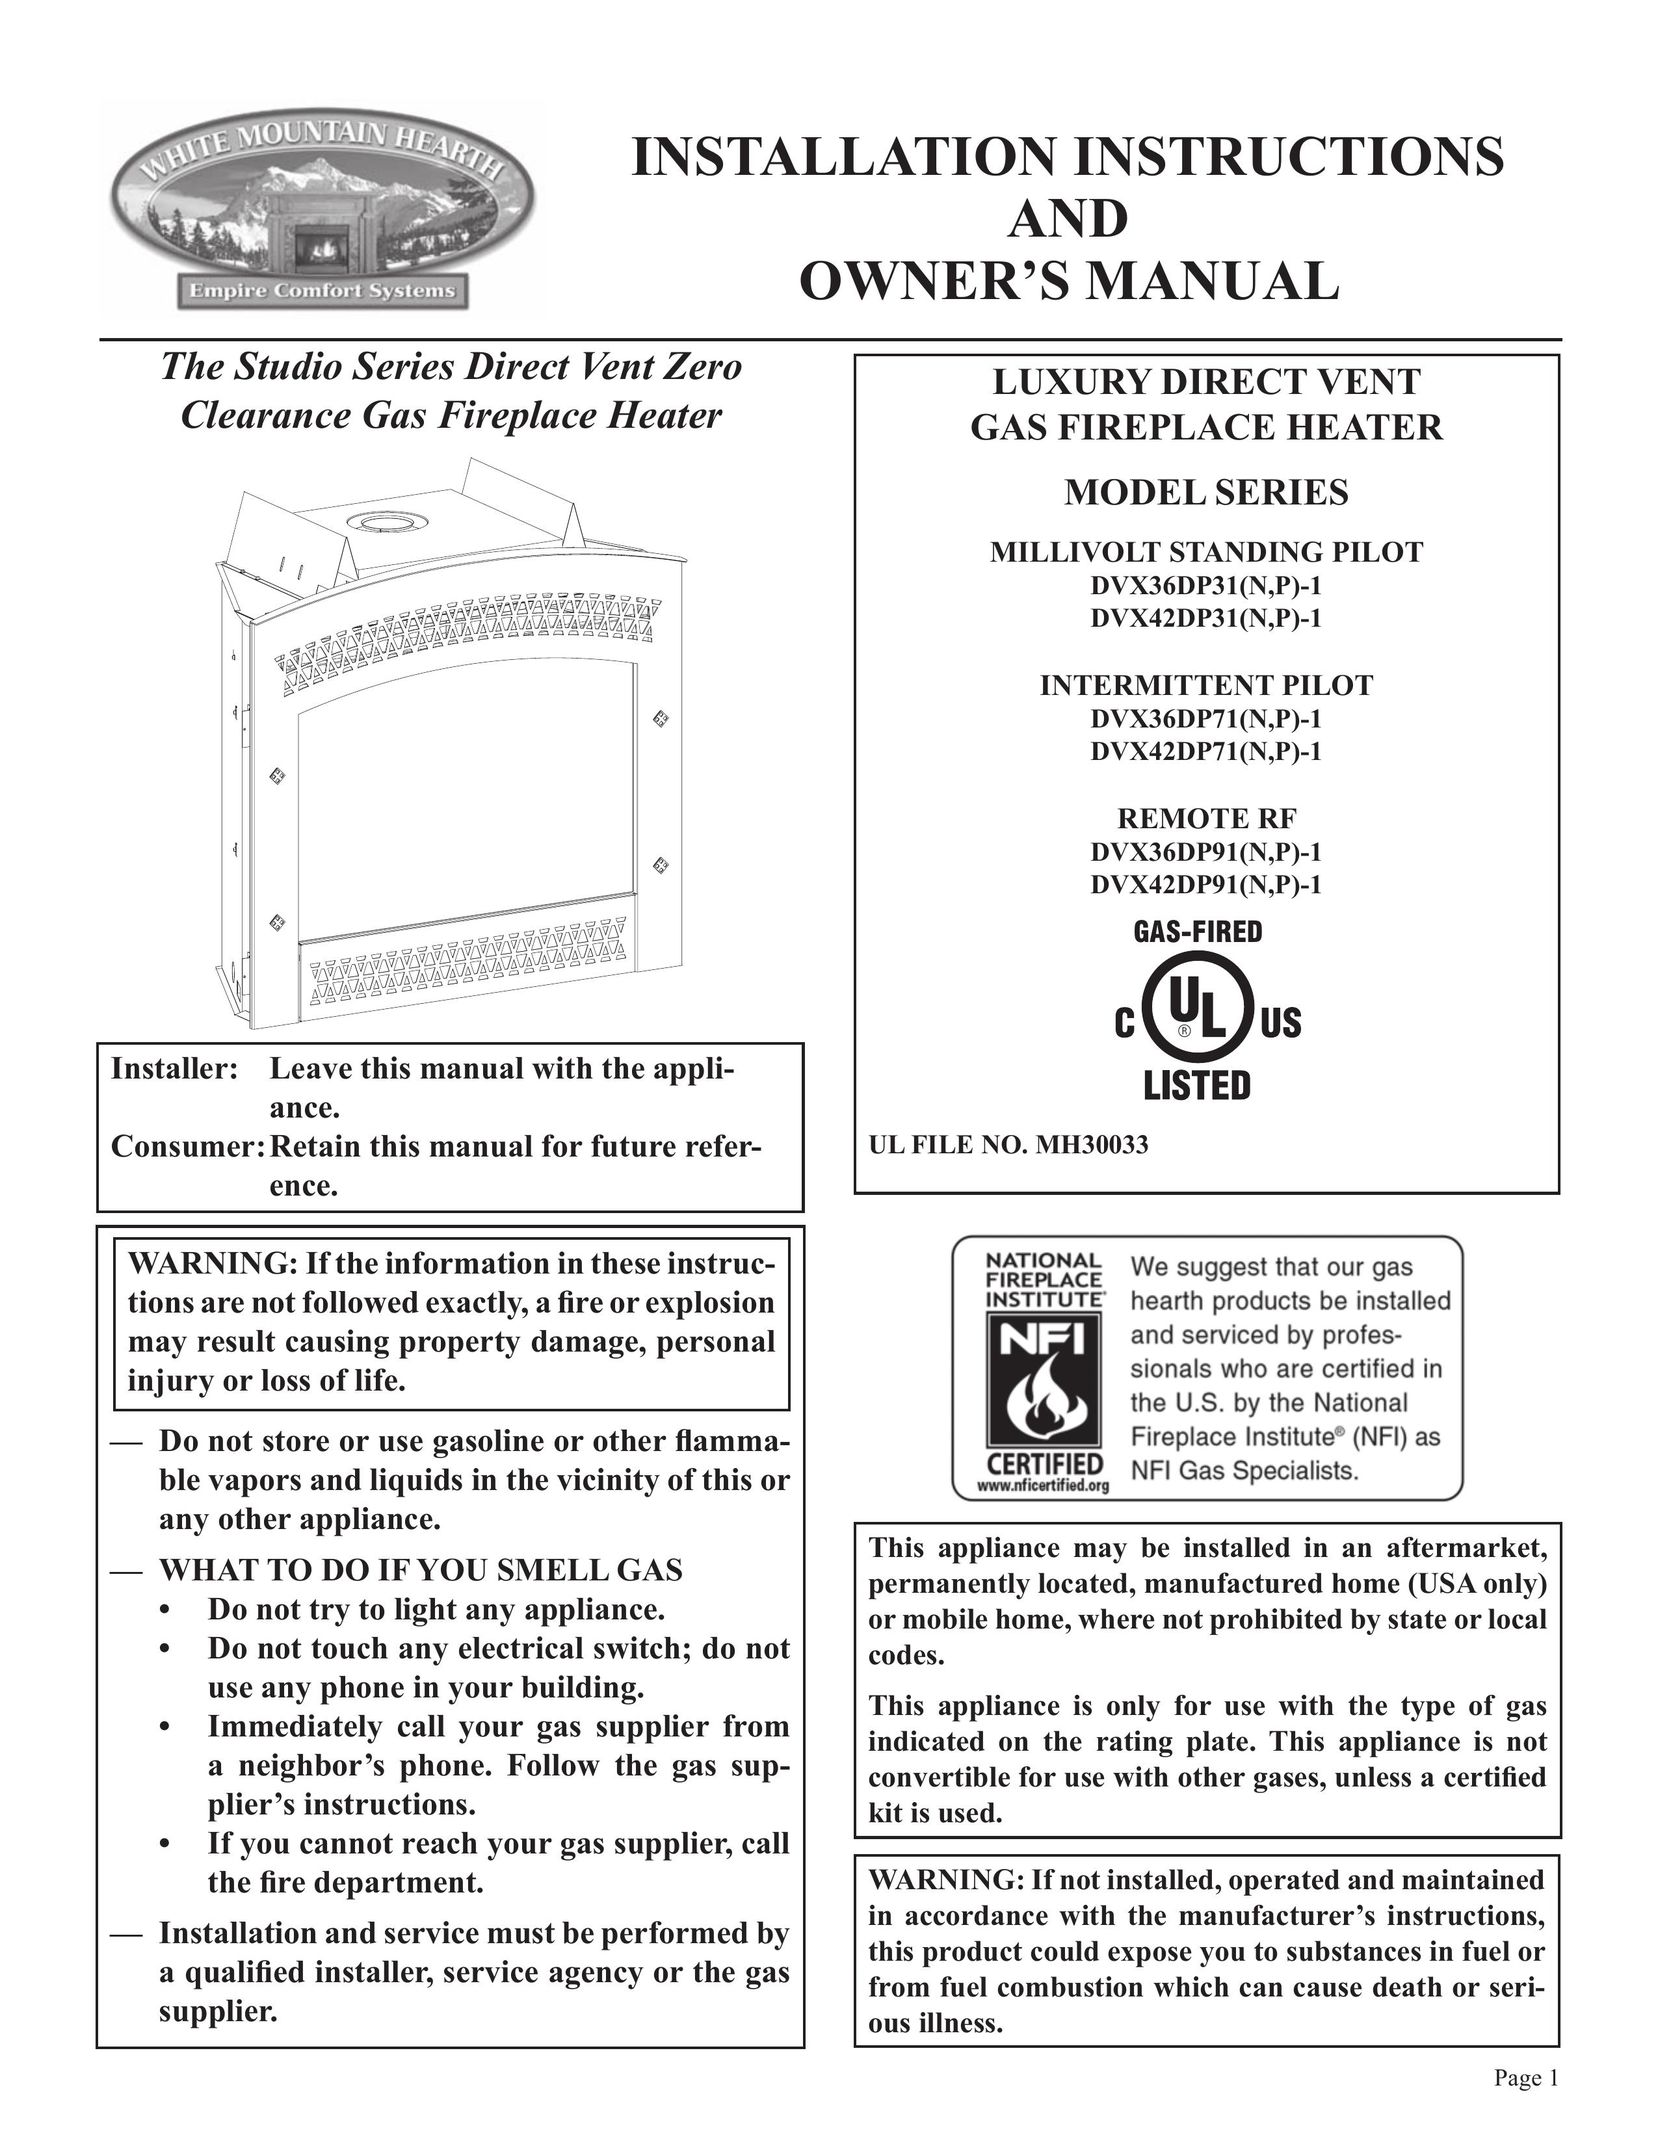 Empire Comfort Systems DVX36DP71(N,P)-1 Gas Heater User Manual